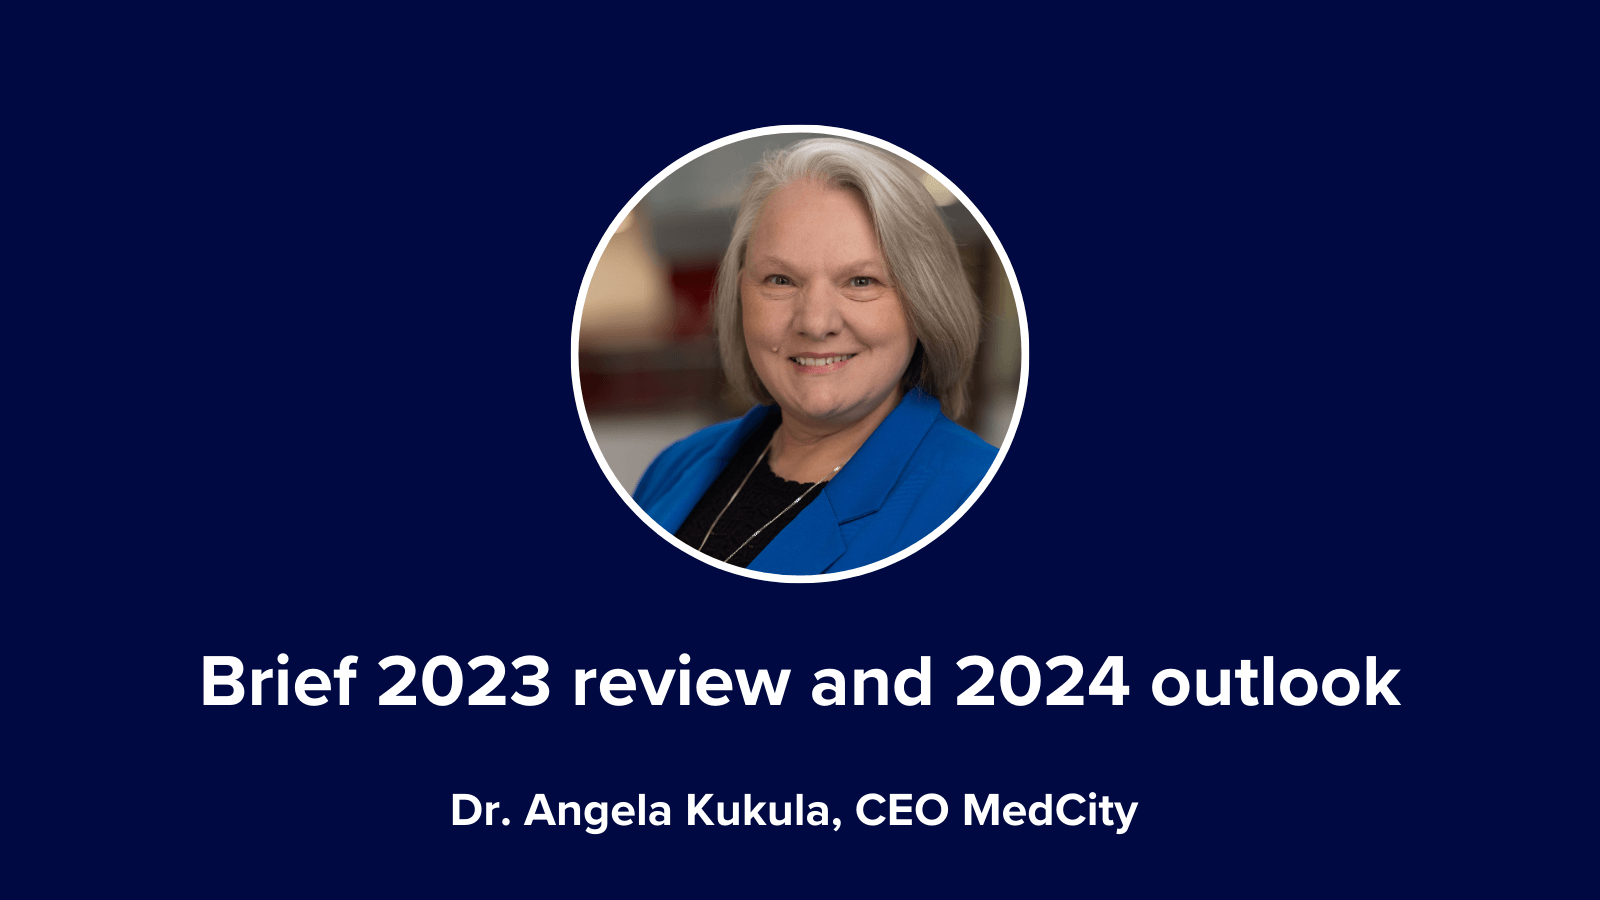 image of Dr. Angela Kukula, CEO MedCity with heading and job title